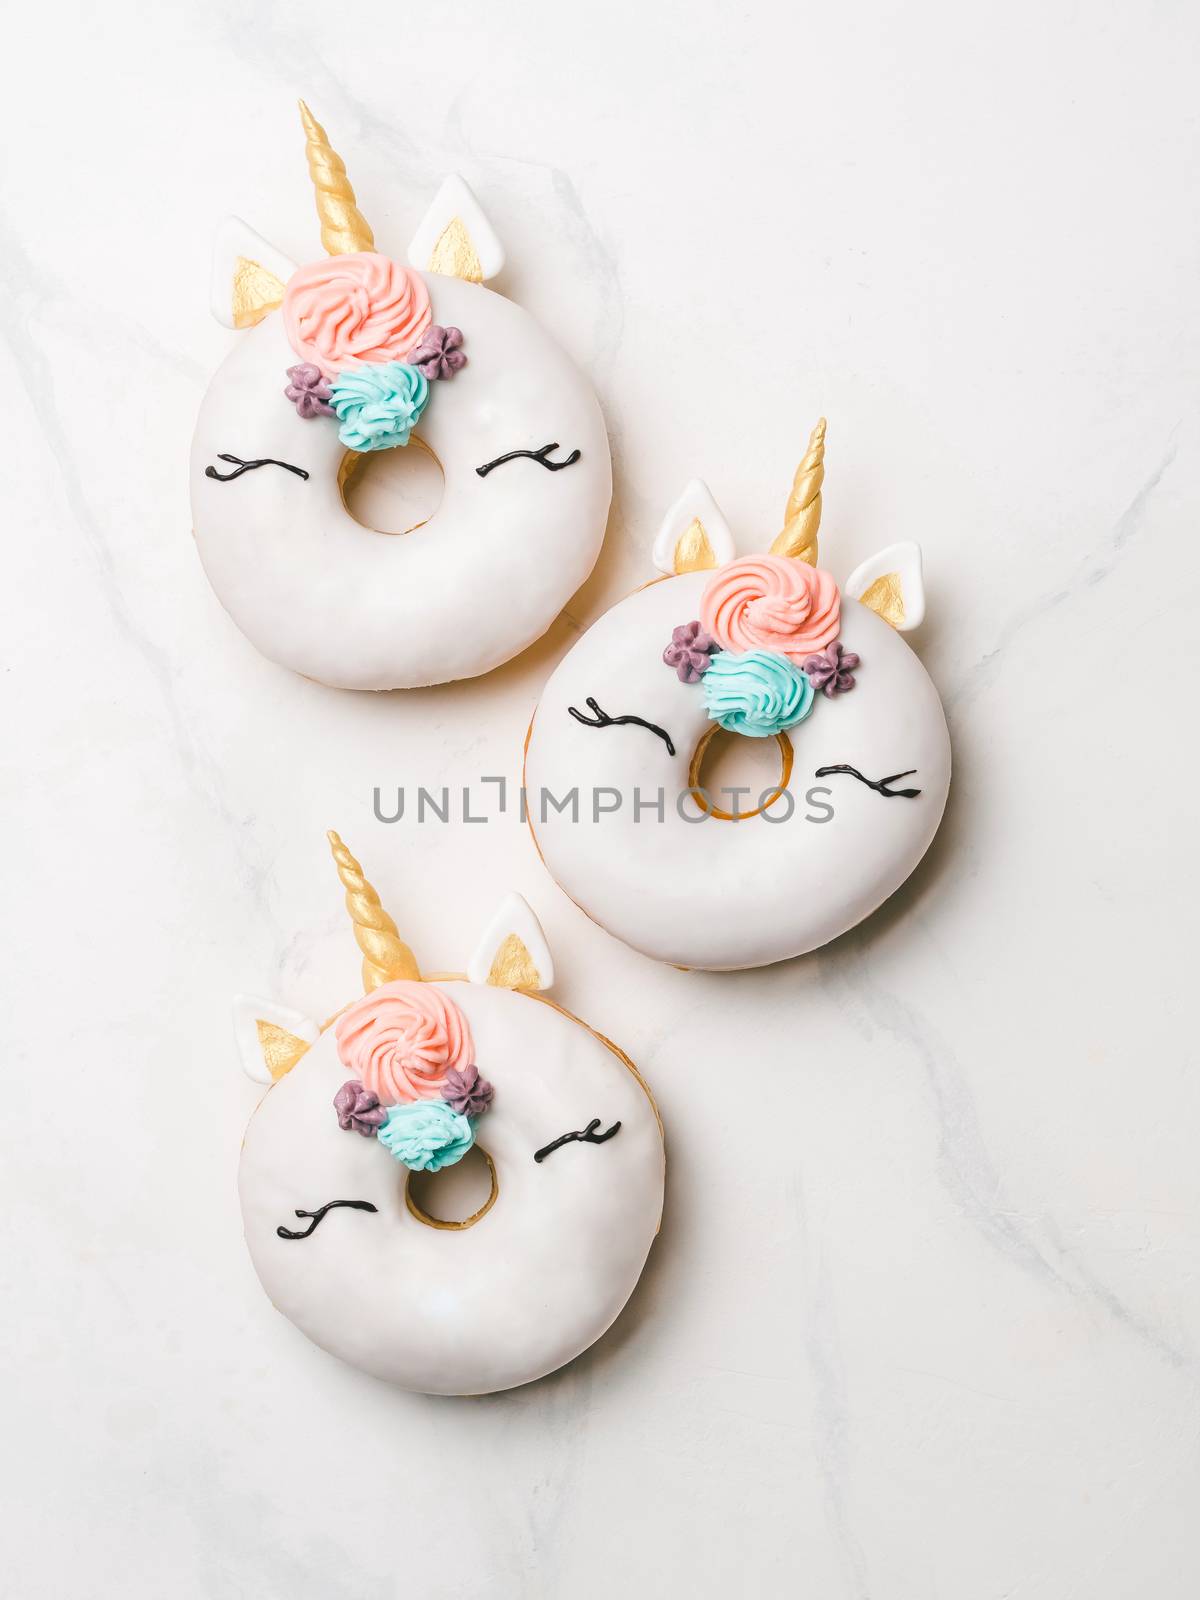 Unicorn donuts on white marble background by fascinadora